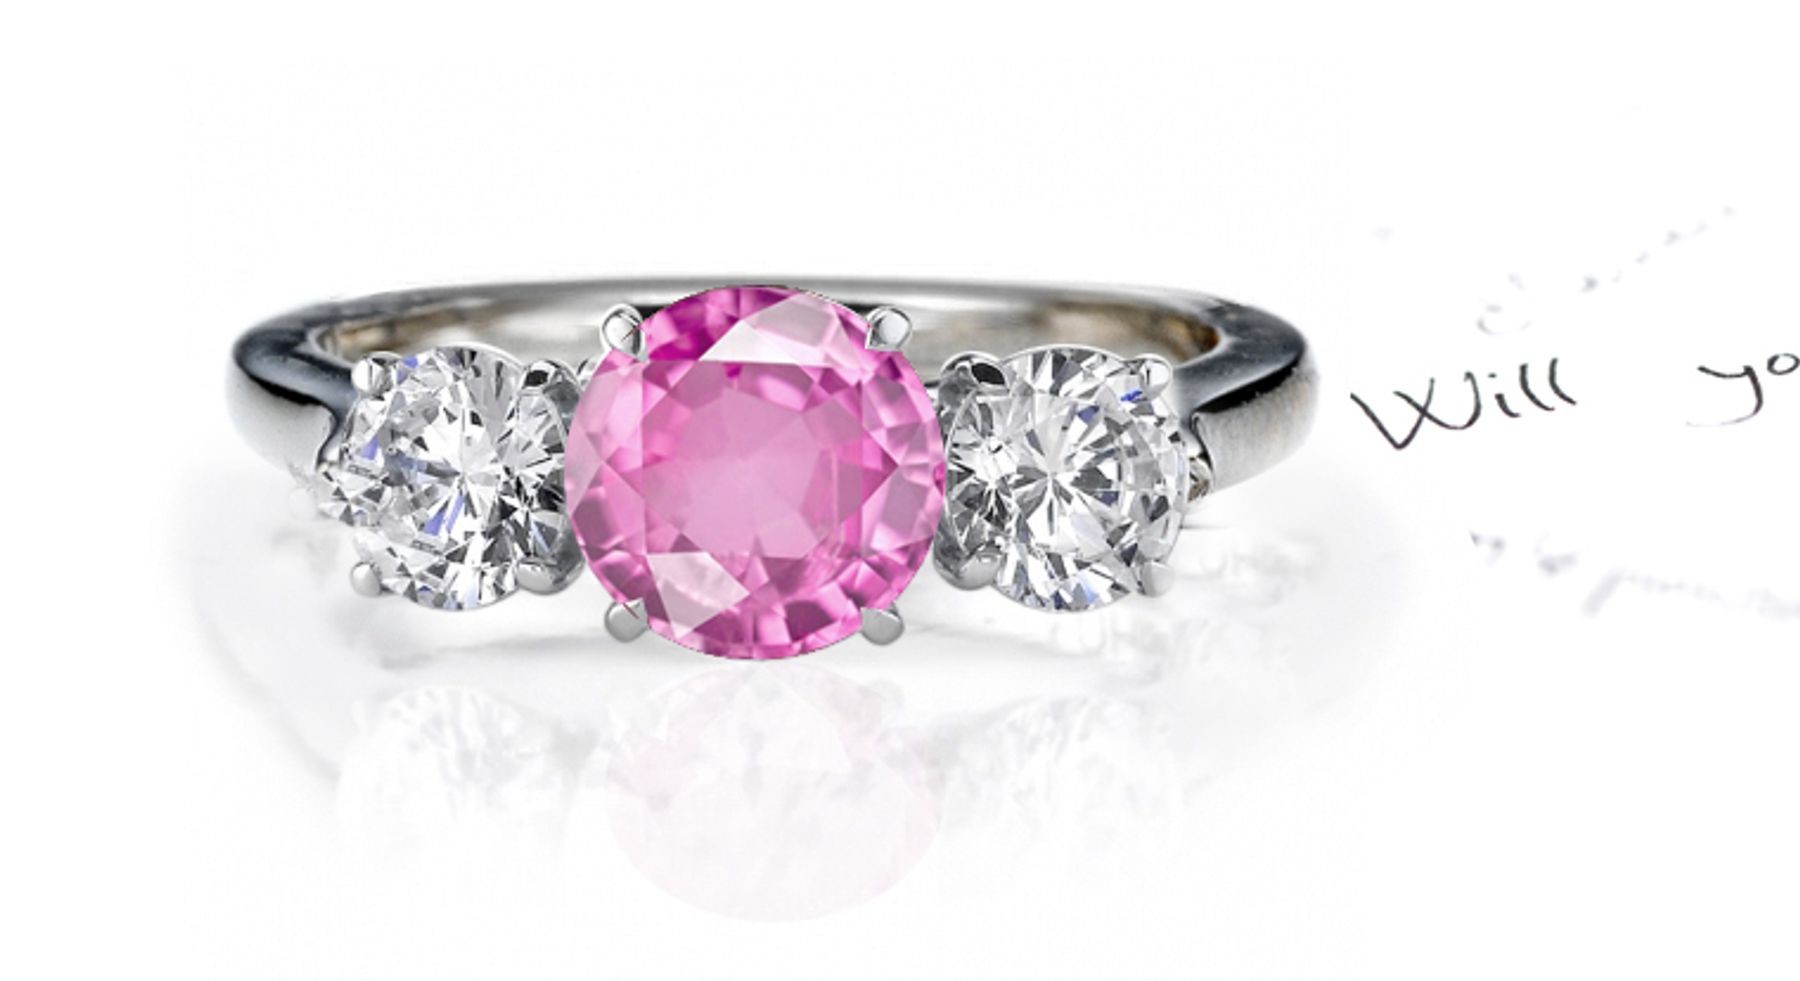 Beautiful Pink Sapphire & Fancy Diamond Engagement Ring Men's Matching Band Available On Request